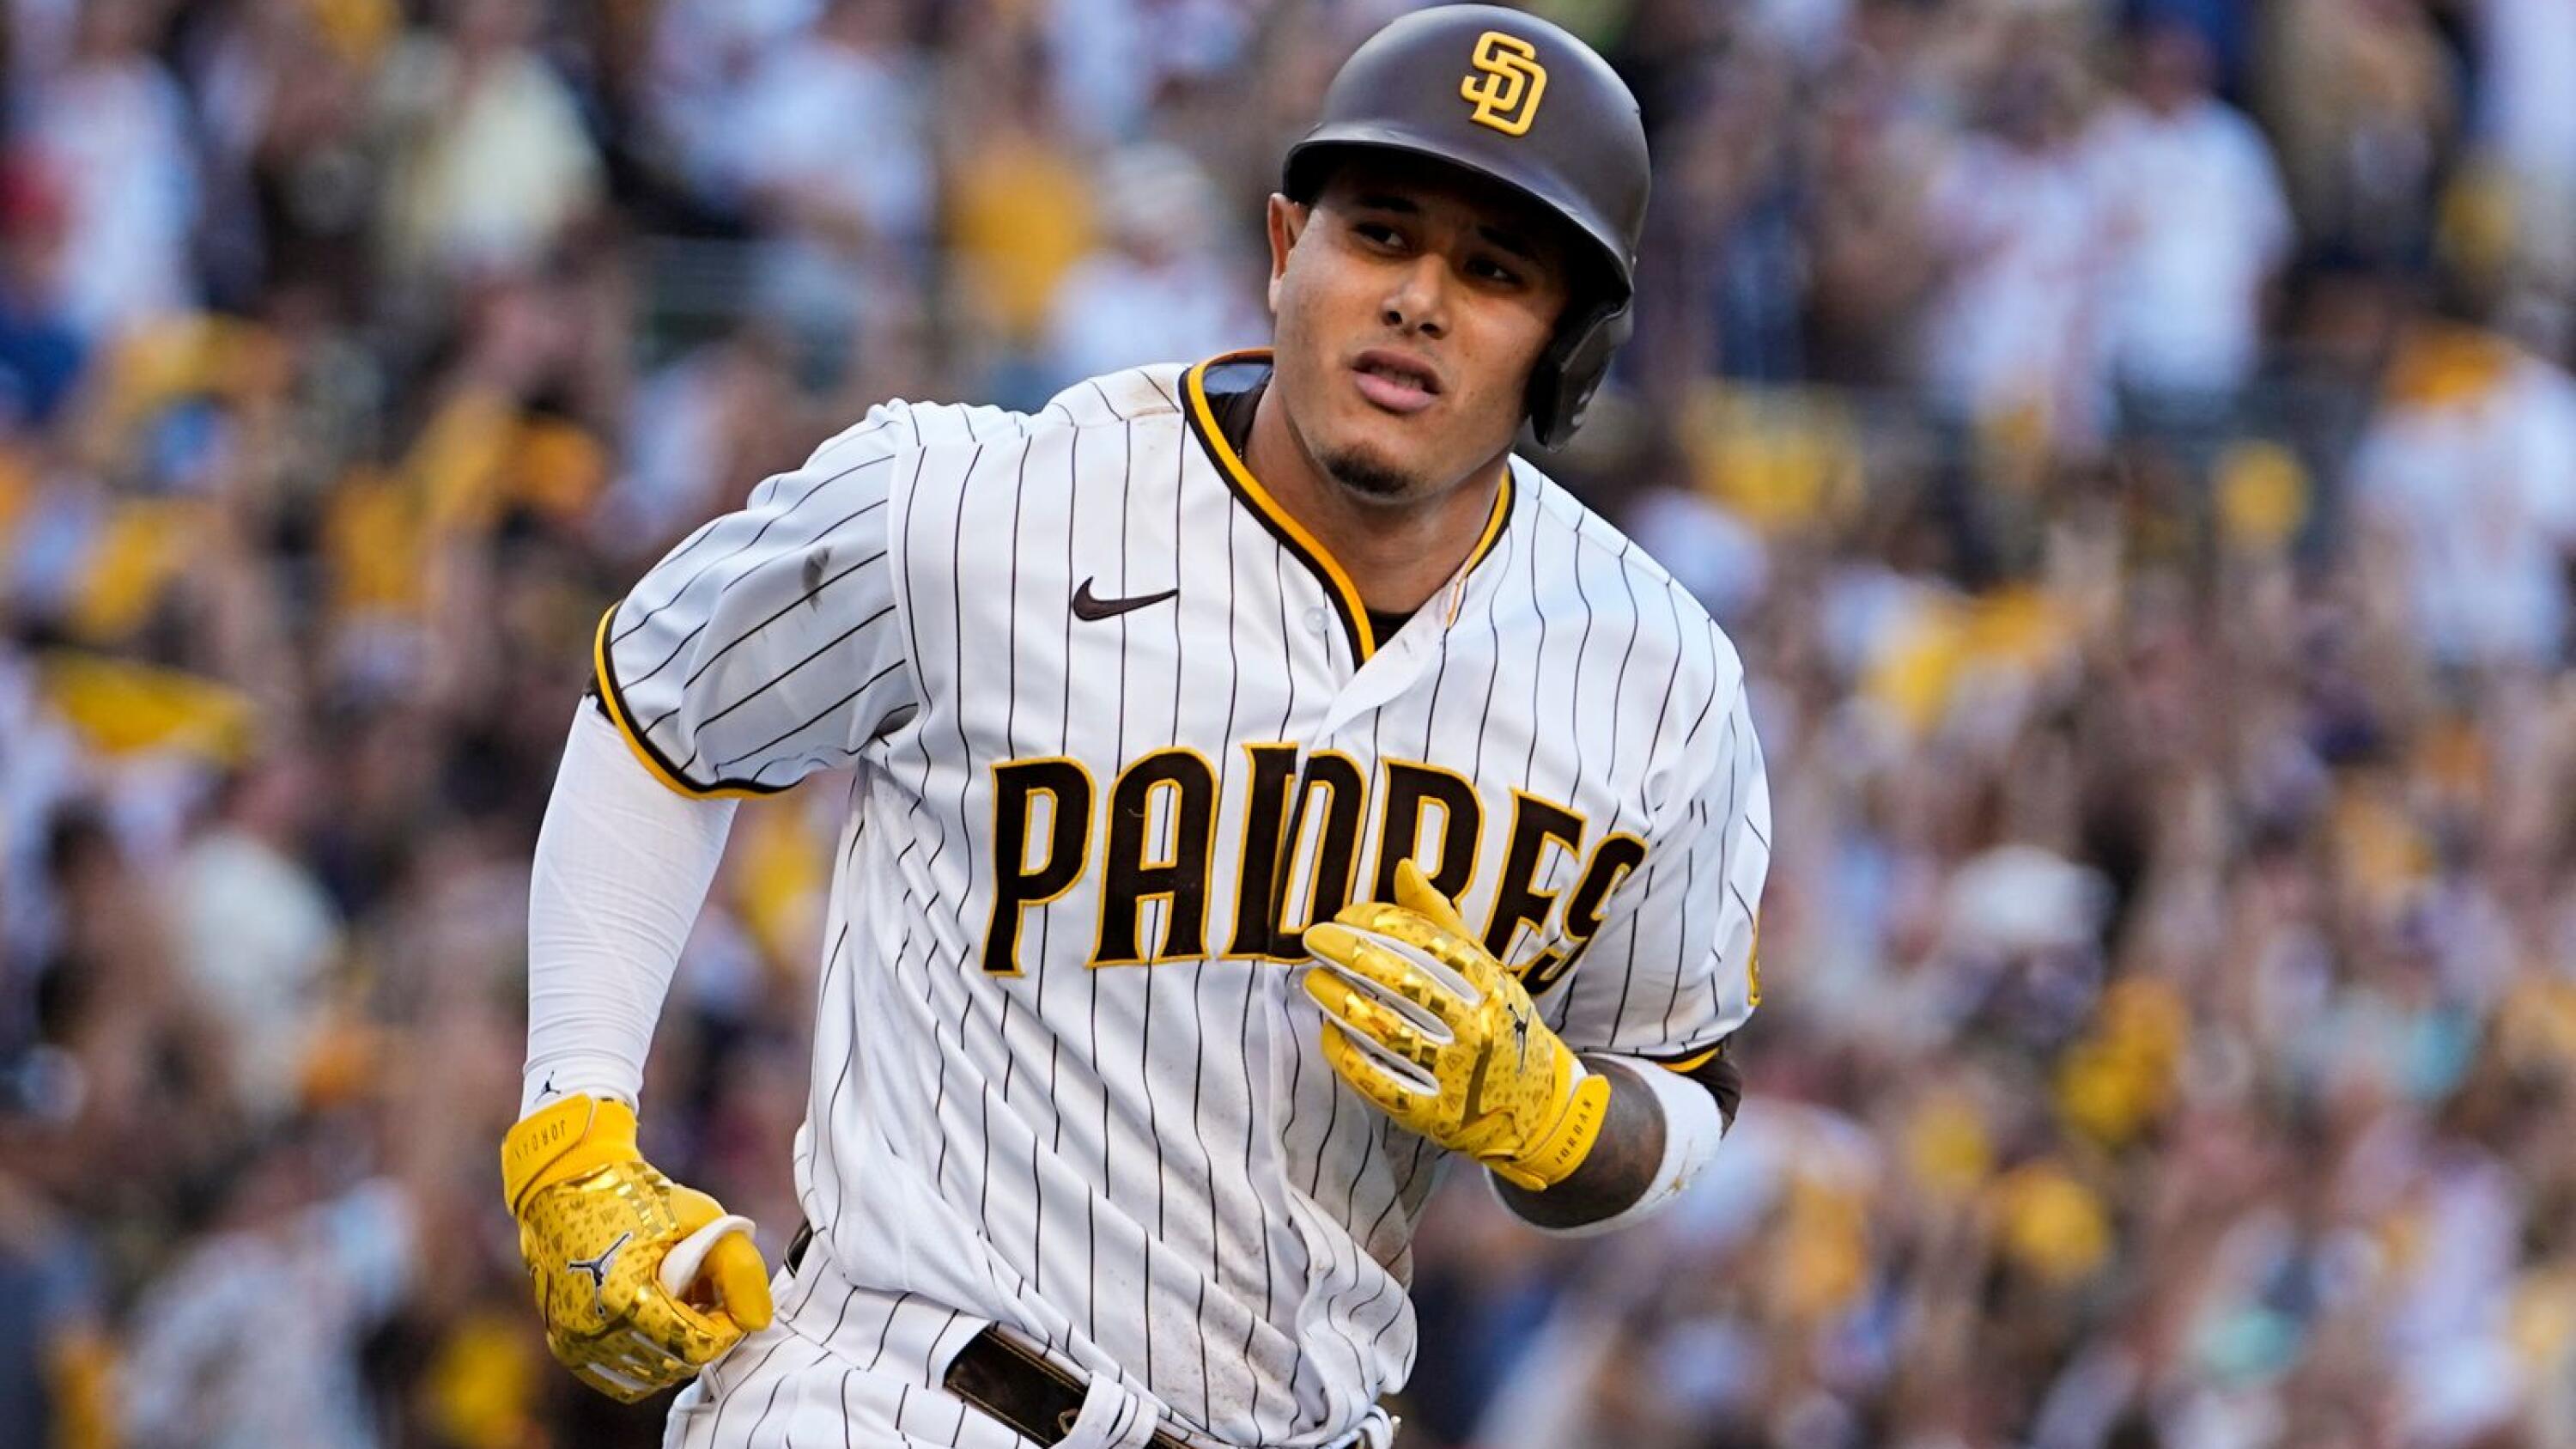 The Padres have signed Manny Machado to a new 11-year contract 